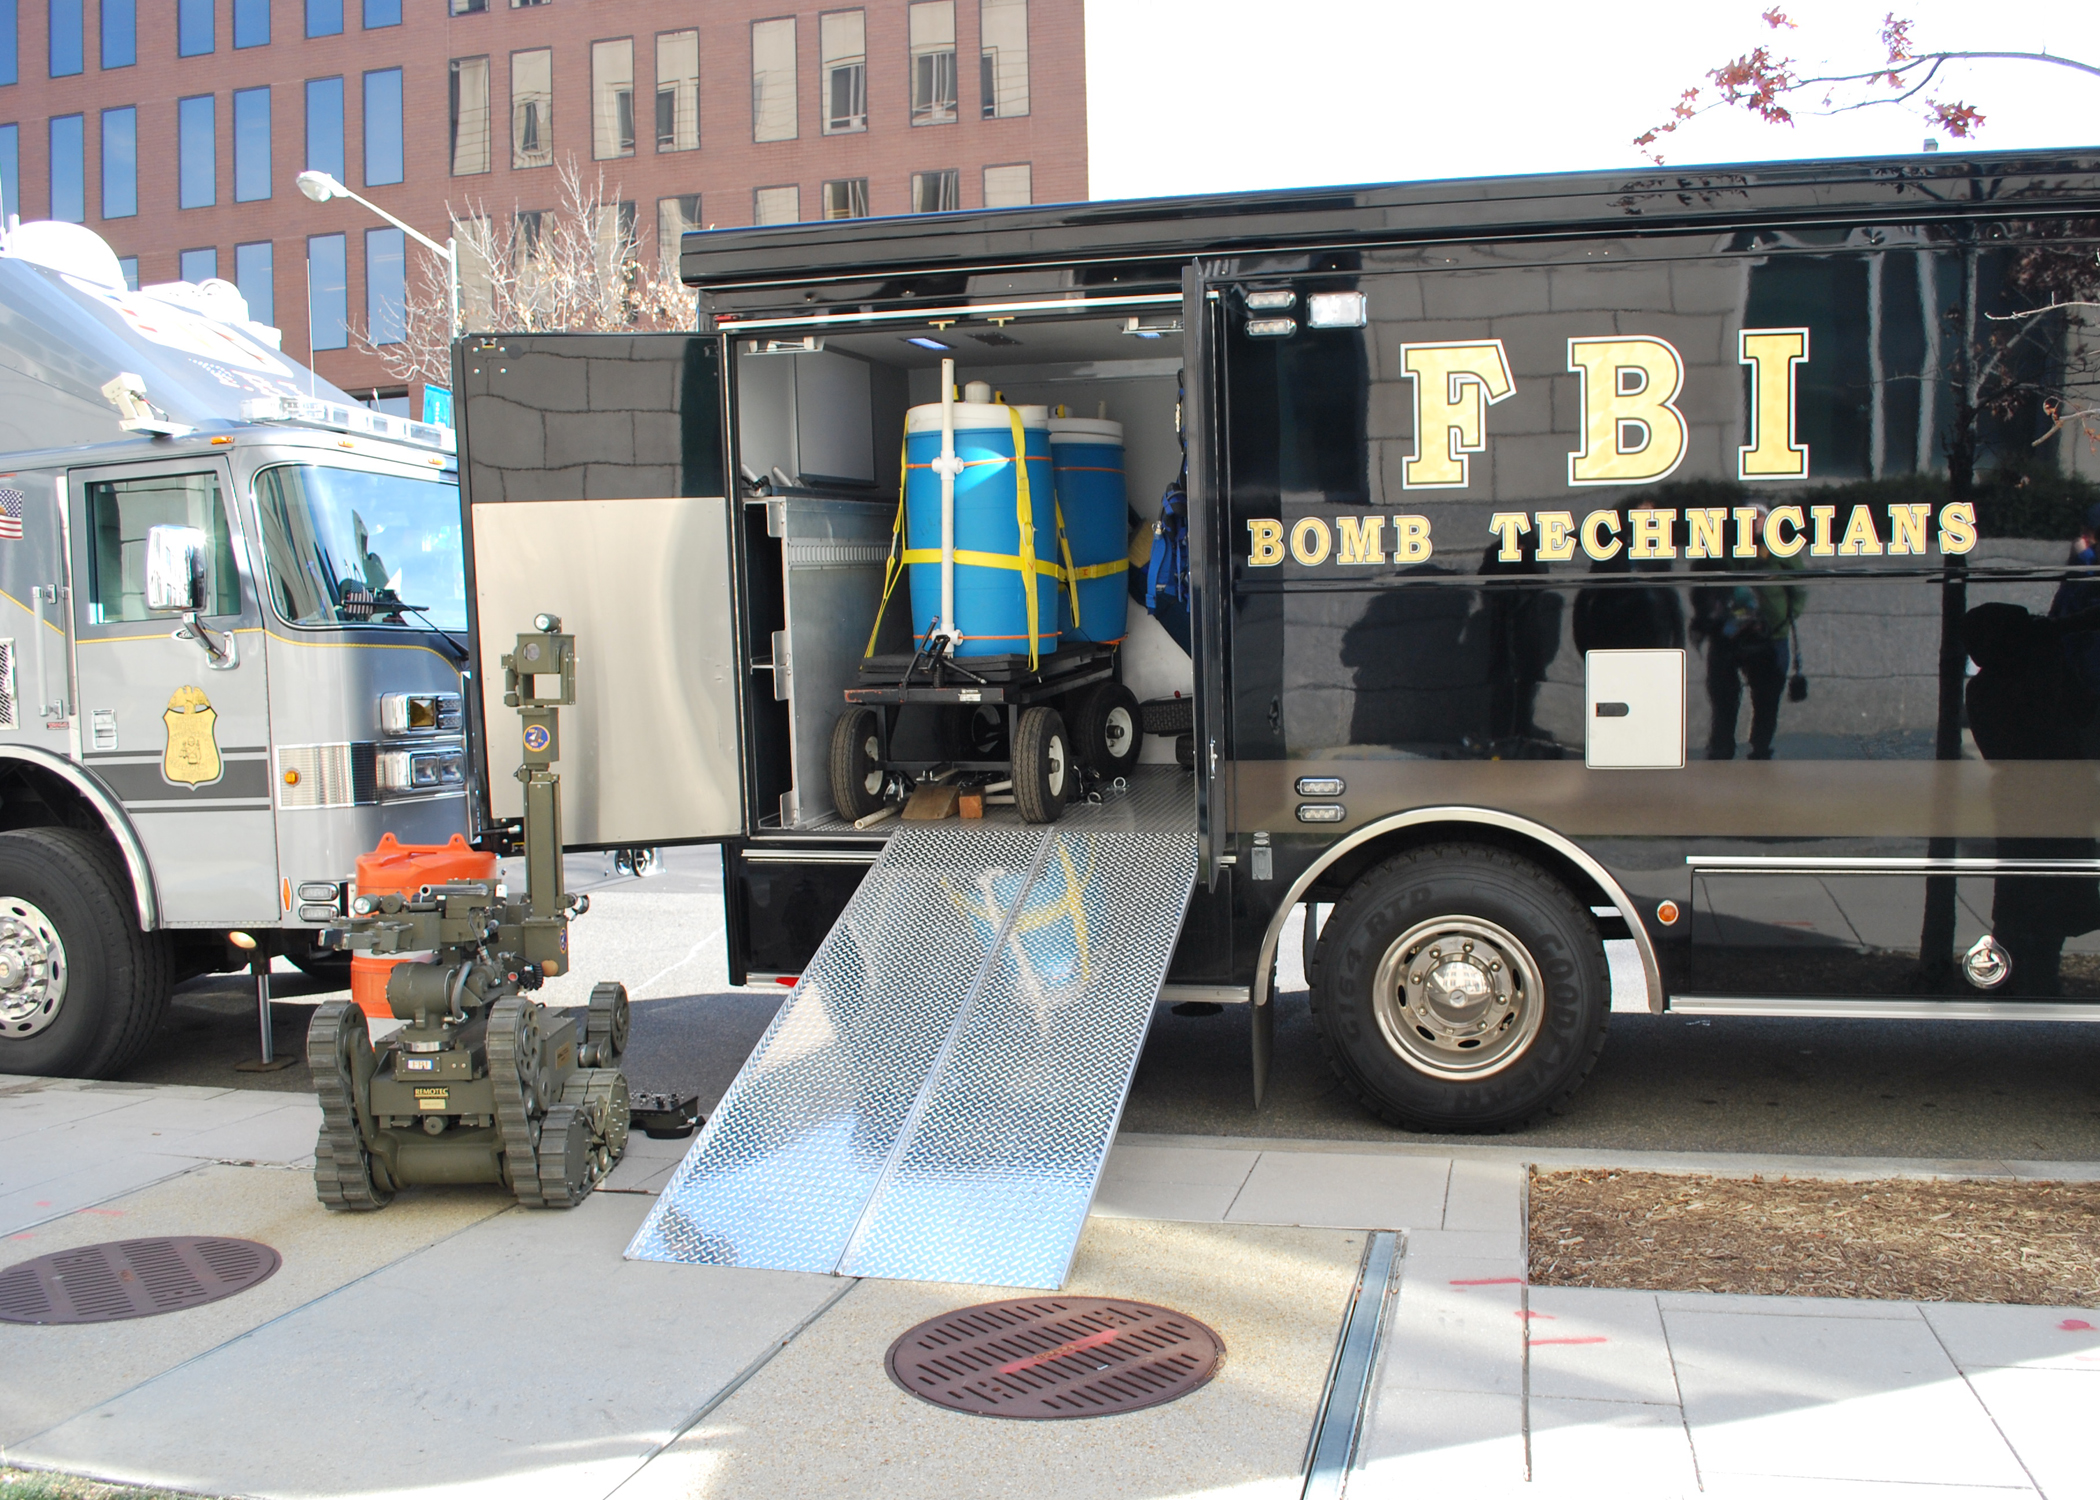 FBI Gear from the bomb techs vehicle